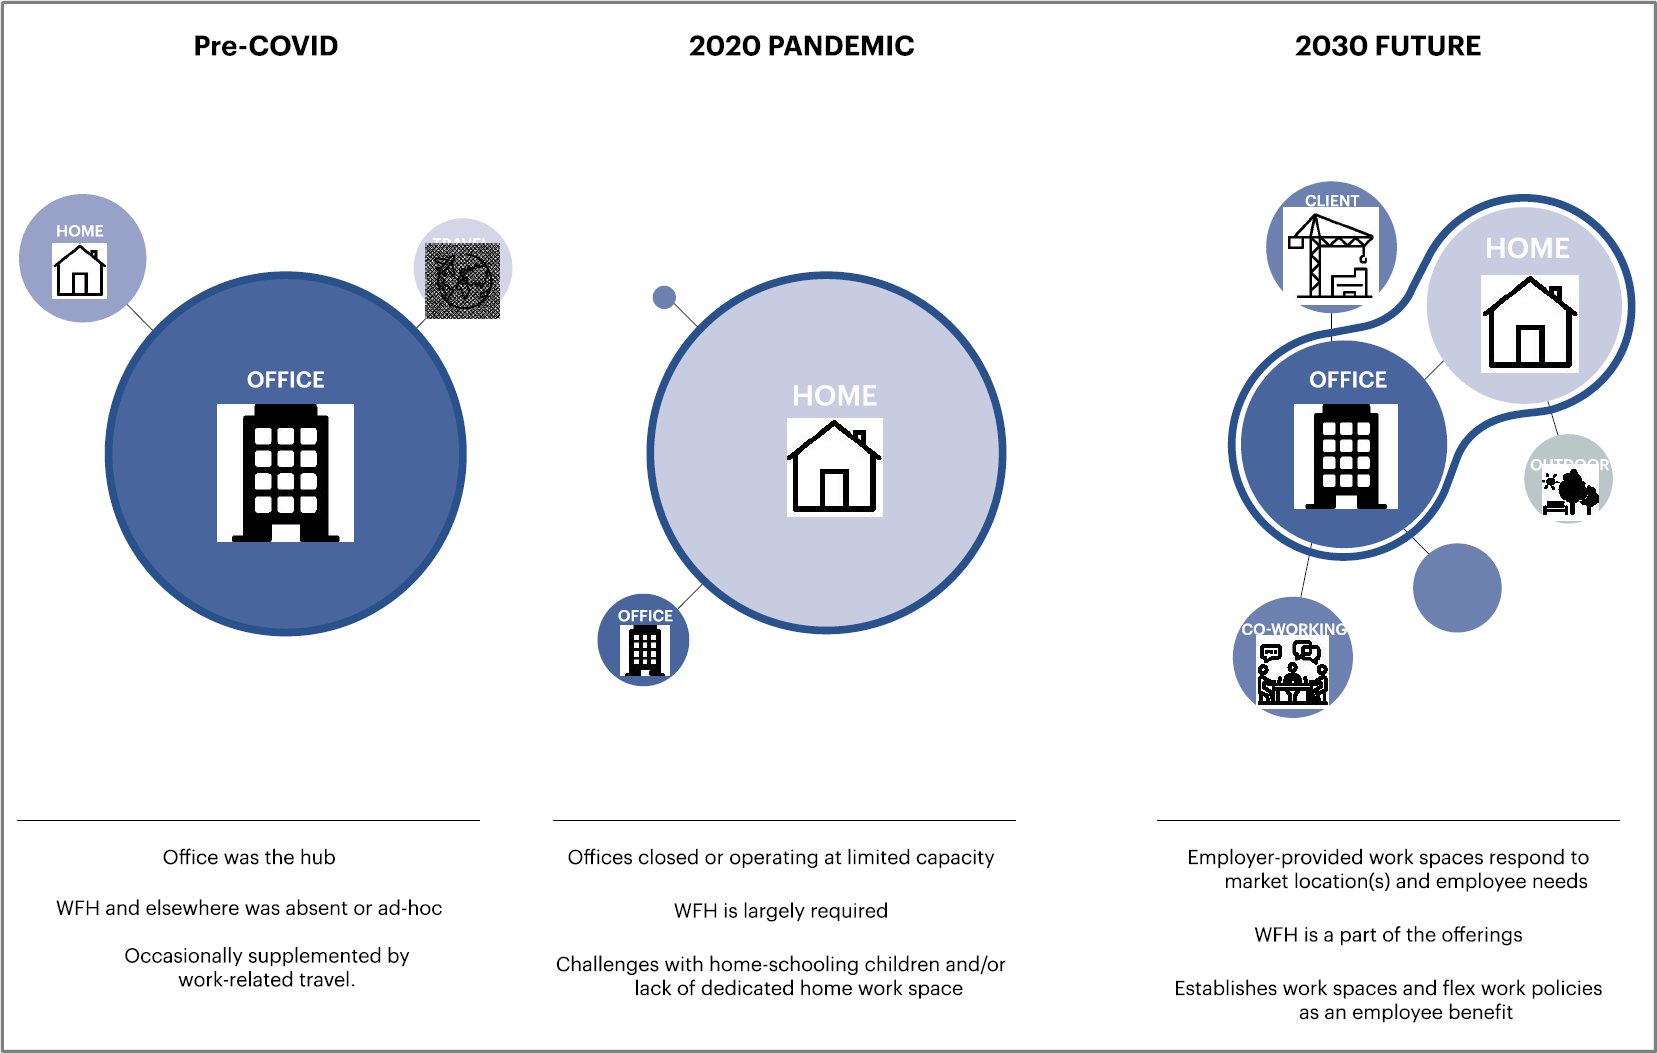 Work Ecosystem Framework shows a large circle called “Office” in the pre-COVID area, a large circle called “Home” in the 2020 Pandemic area, and medium circles called “Home” and “Office,” with several small peripherap circles, in the 2030 Future area.